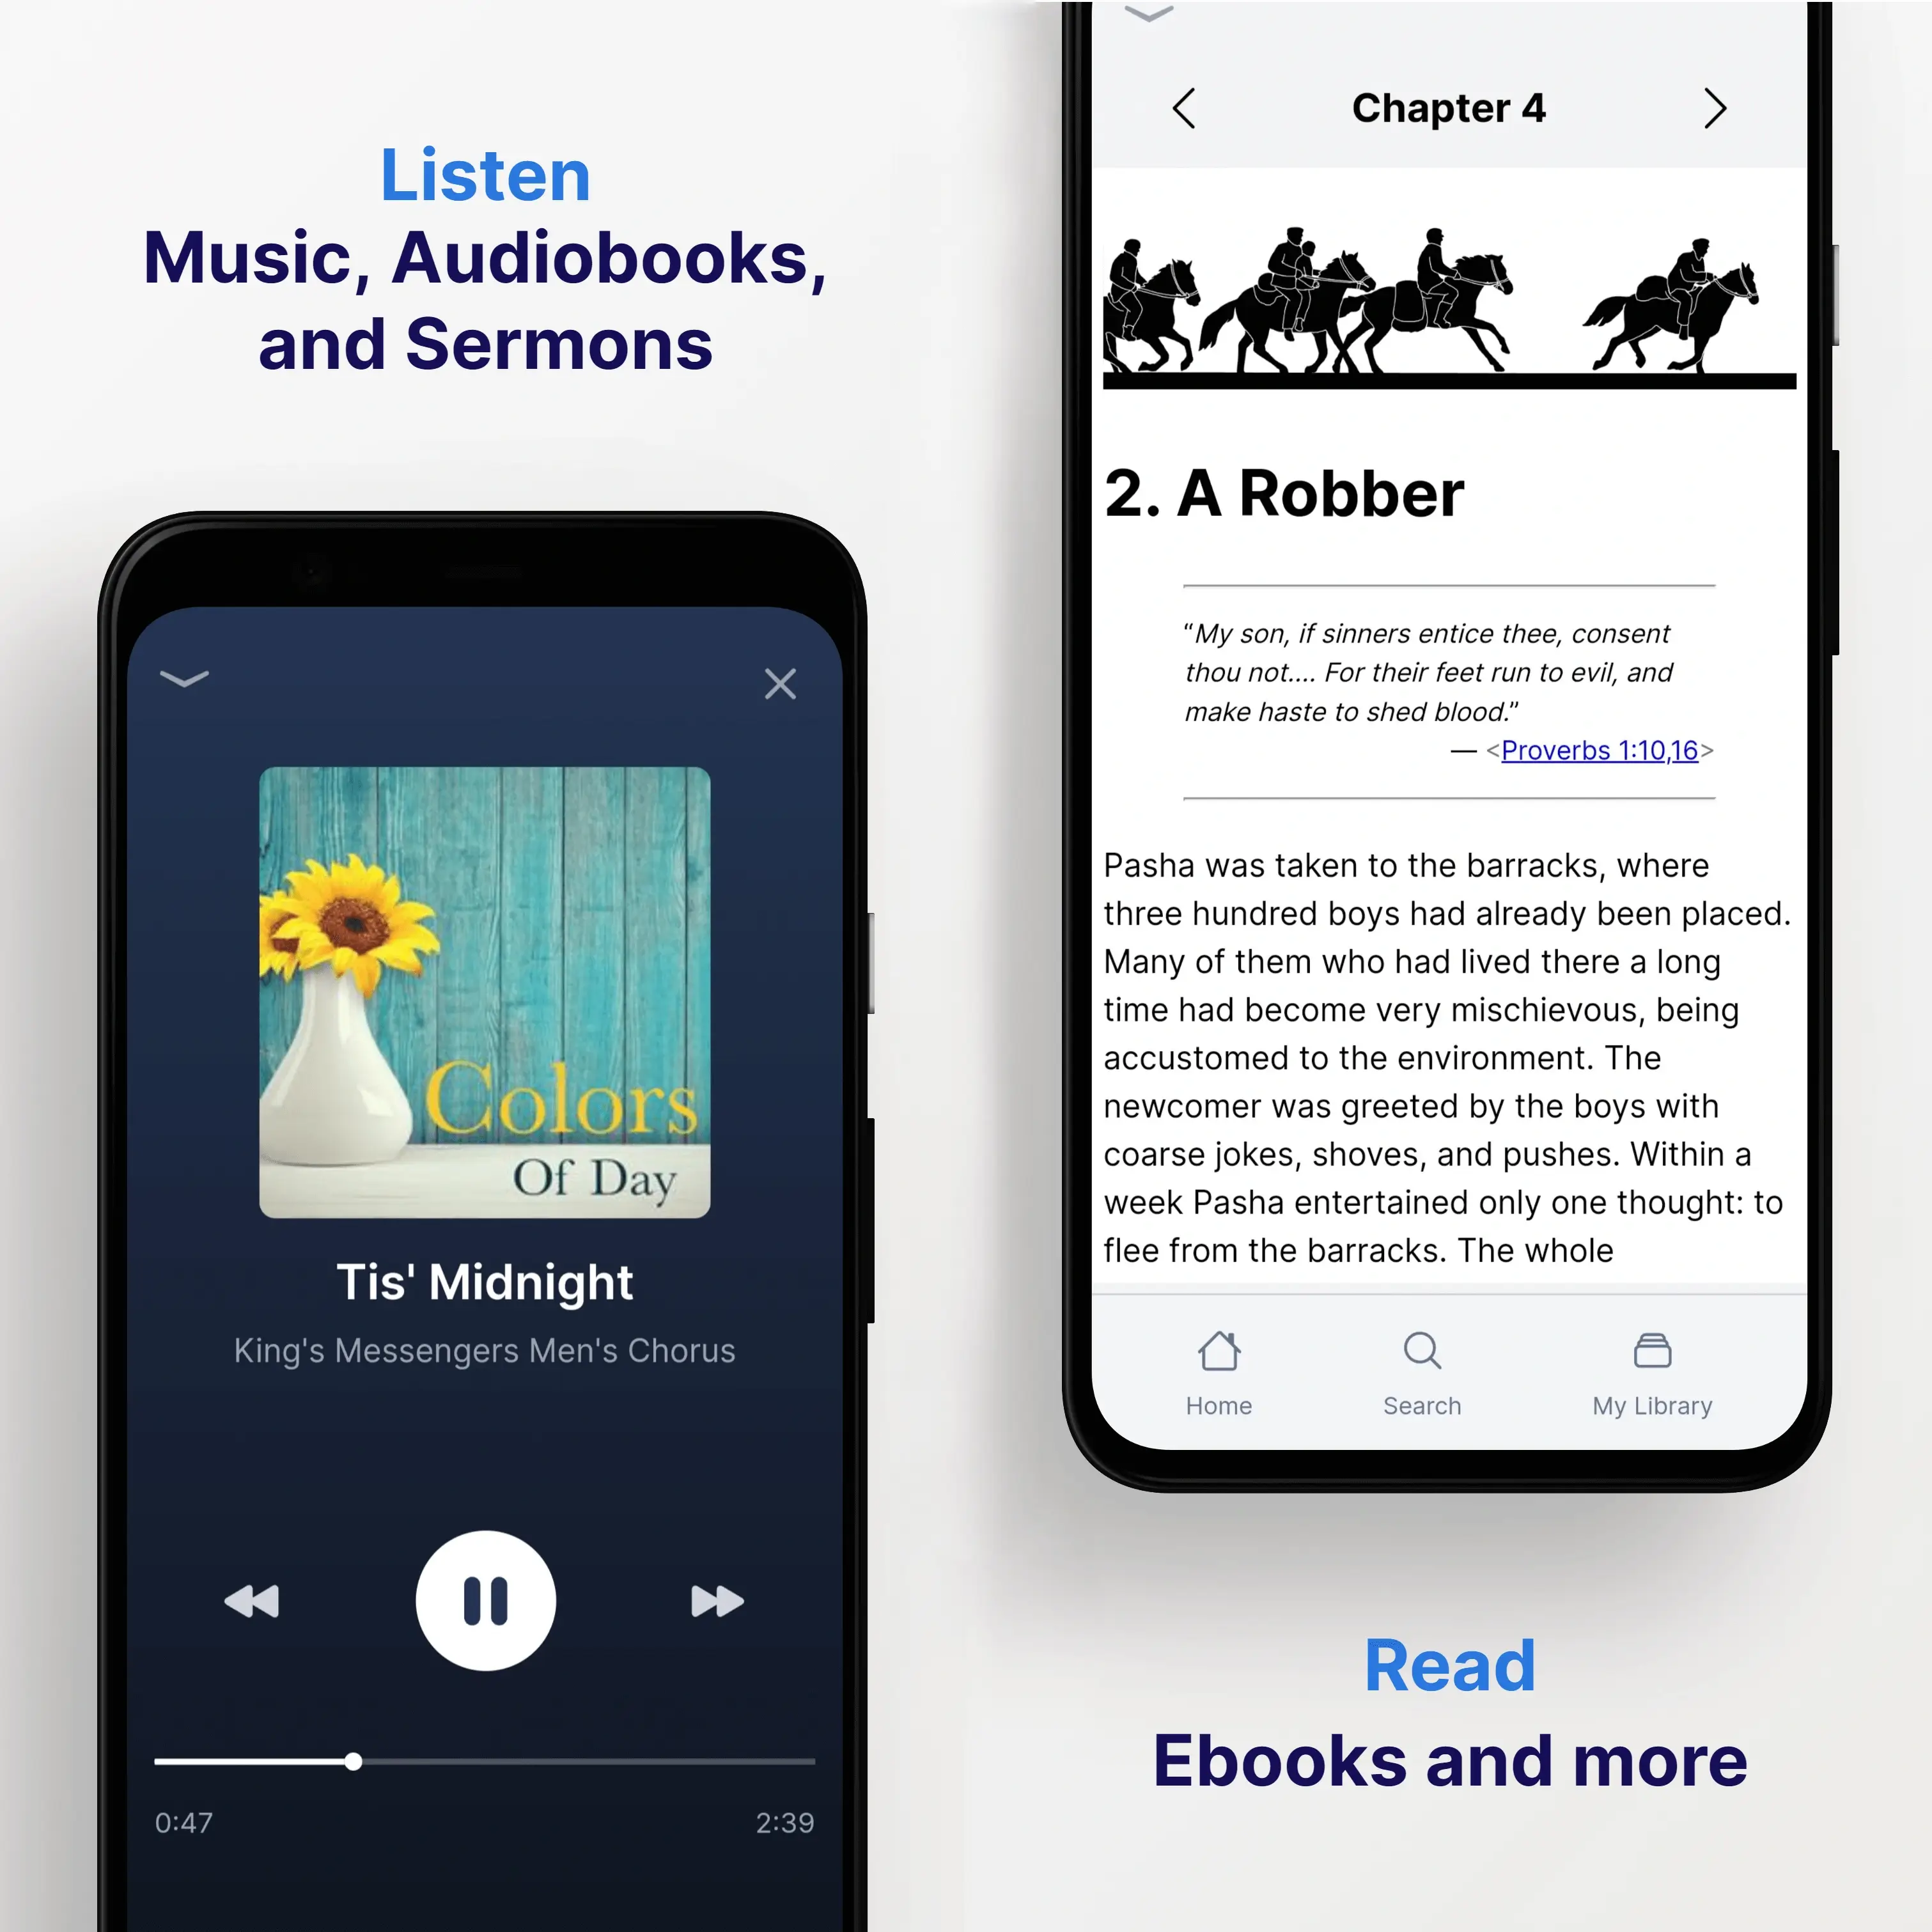 music player and ebook screenshots of anabaptist resources app